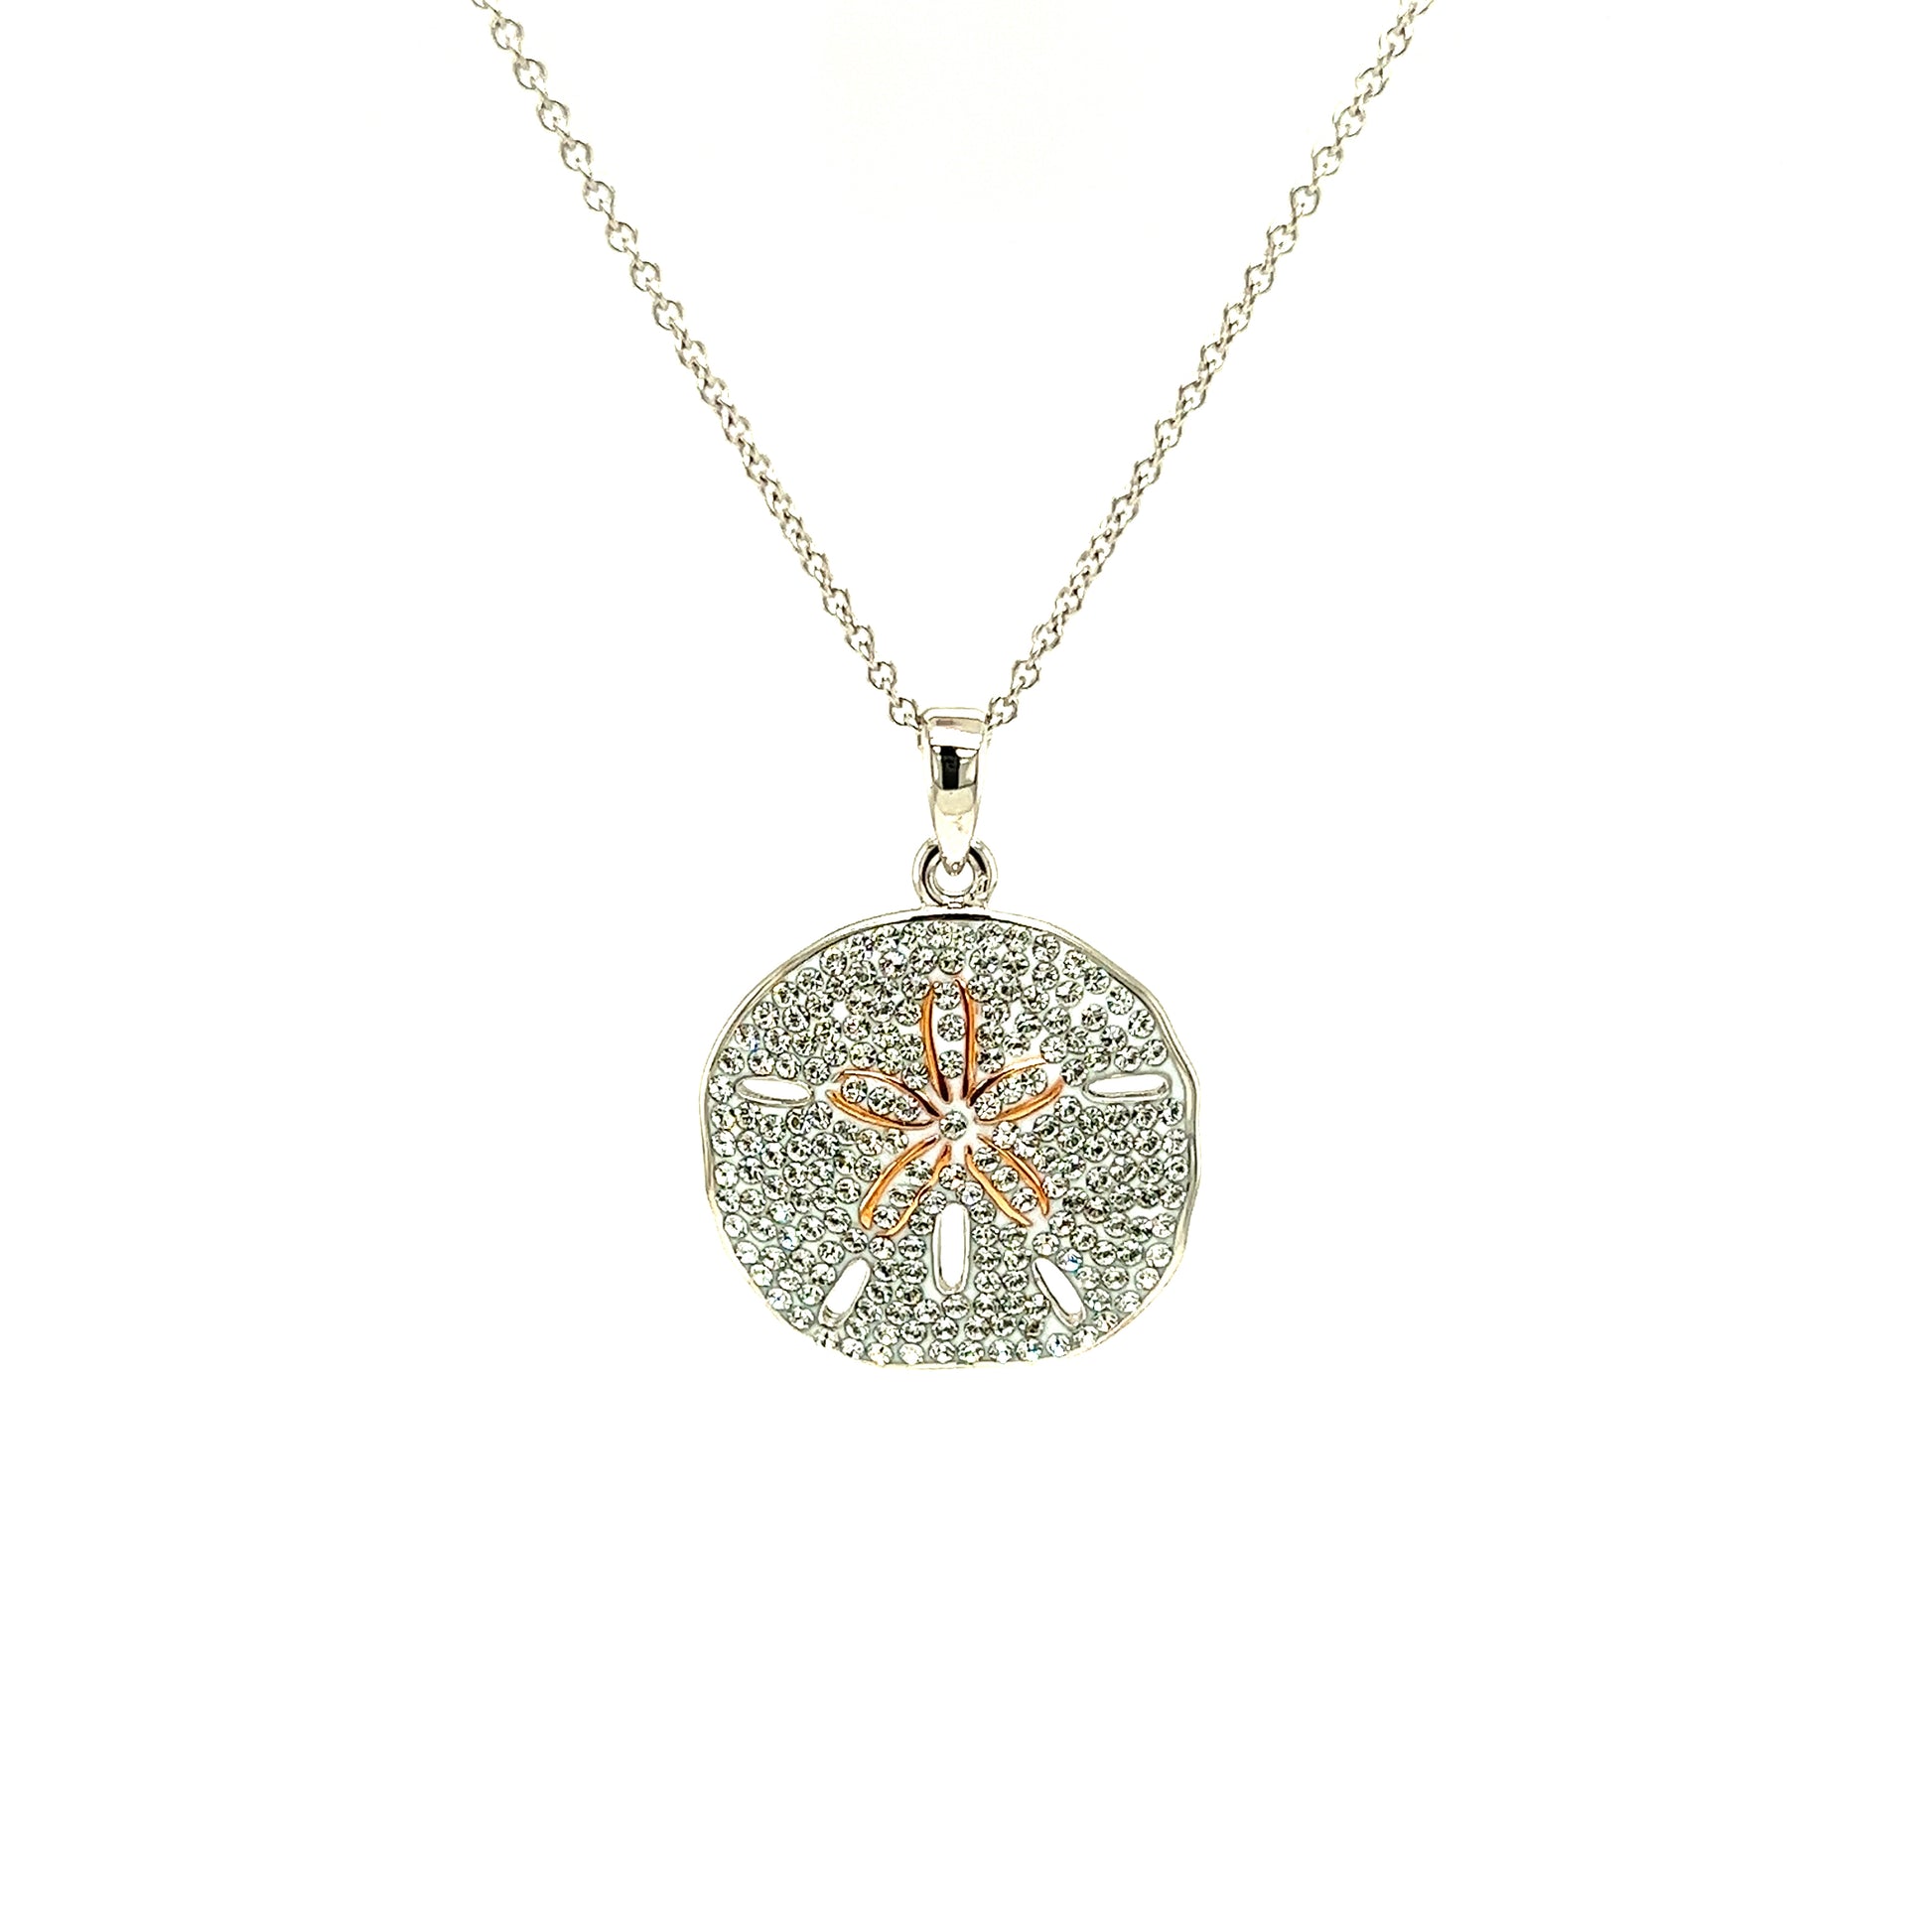 Sand Dollar Necklace With White Crystals and Rose Gold Plating in Sterling Silver Necklace Front View